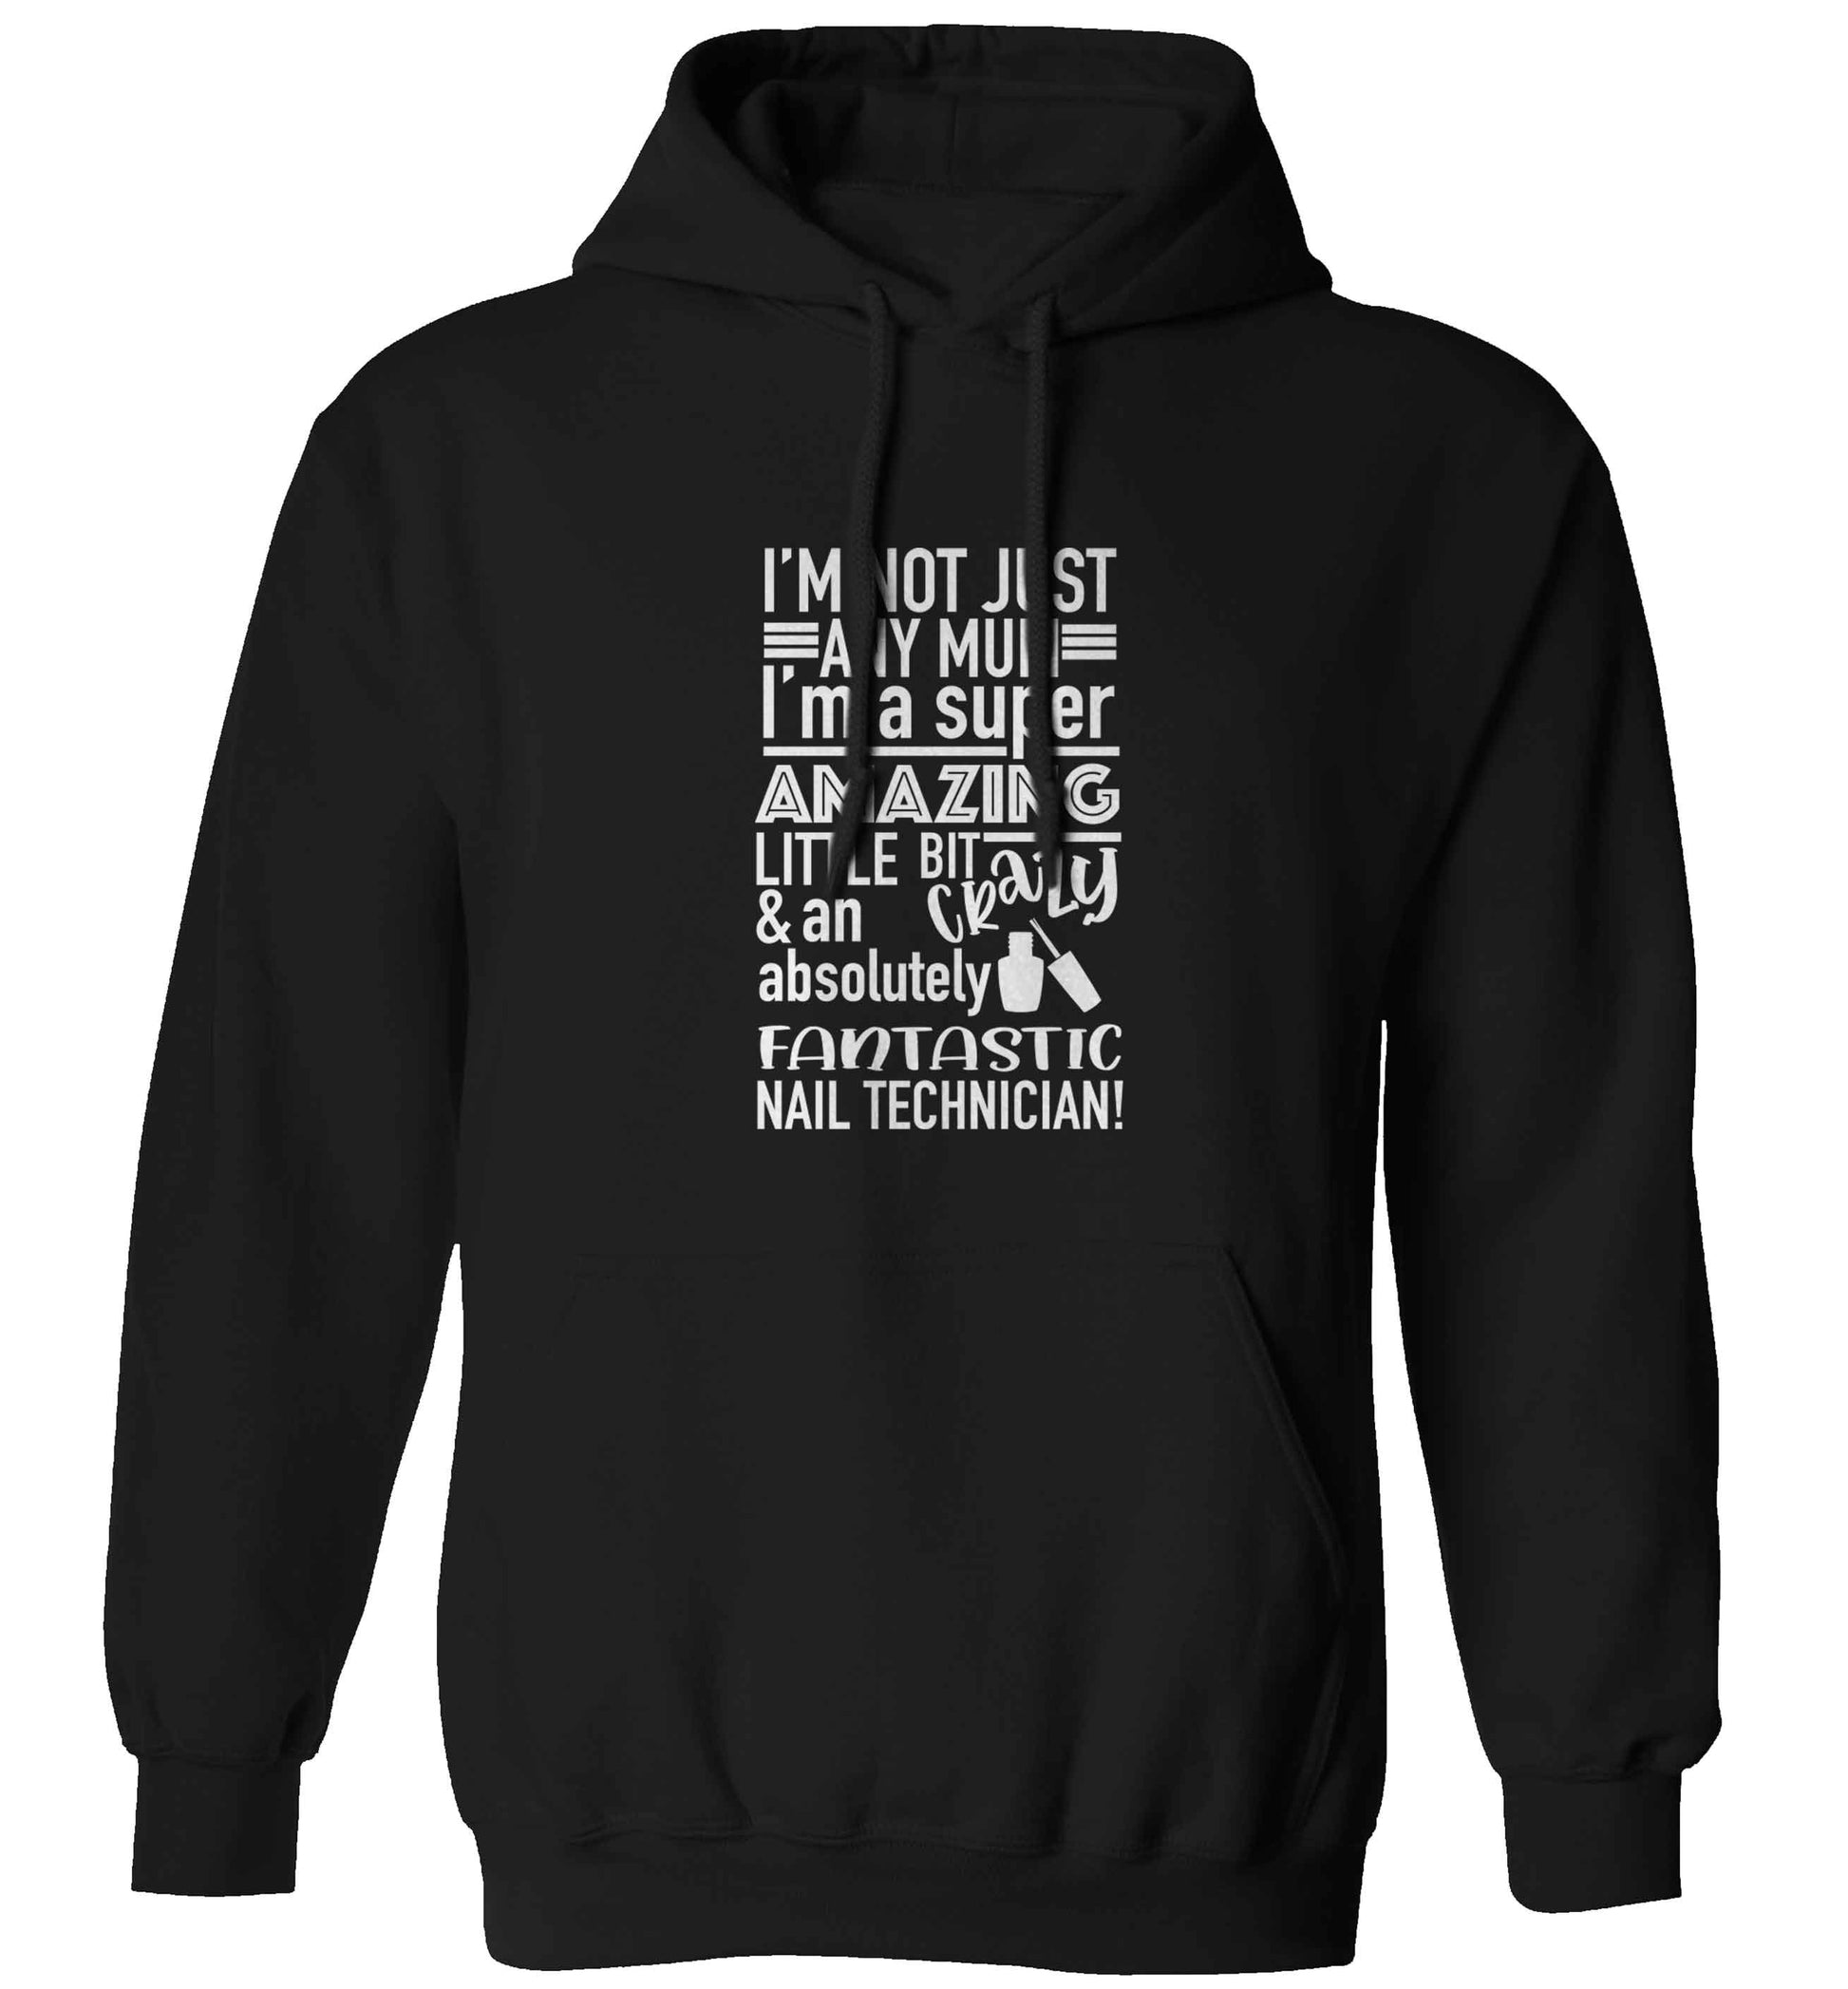 I'm not just any mum I'm a super amazing little bit crazy and an absolutely fantastic nail technician! adults unisex black hoodie 2XL